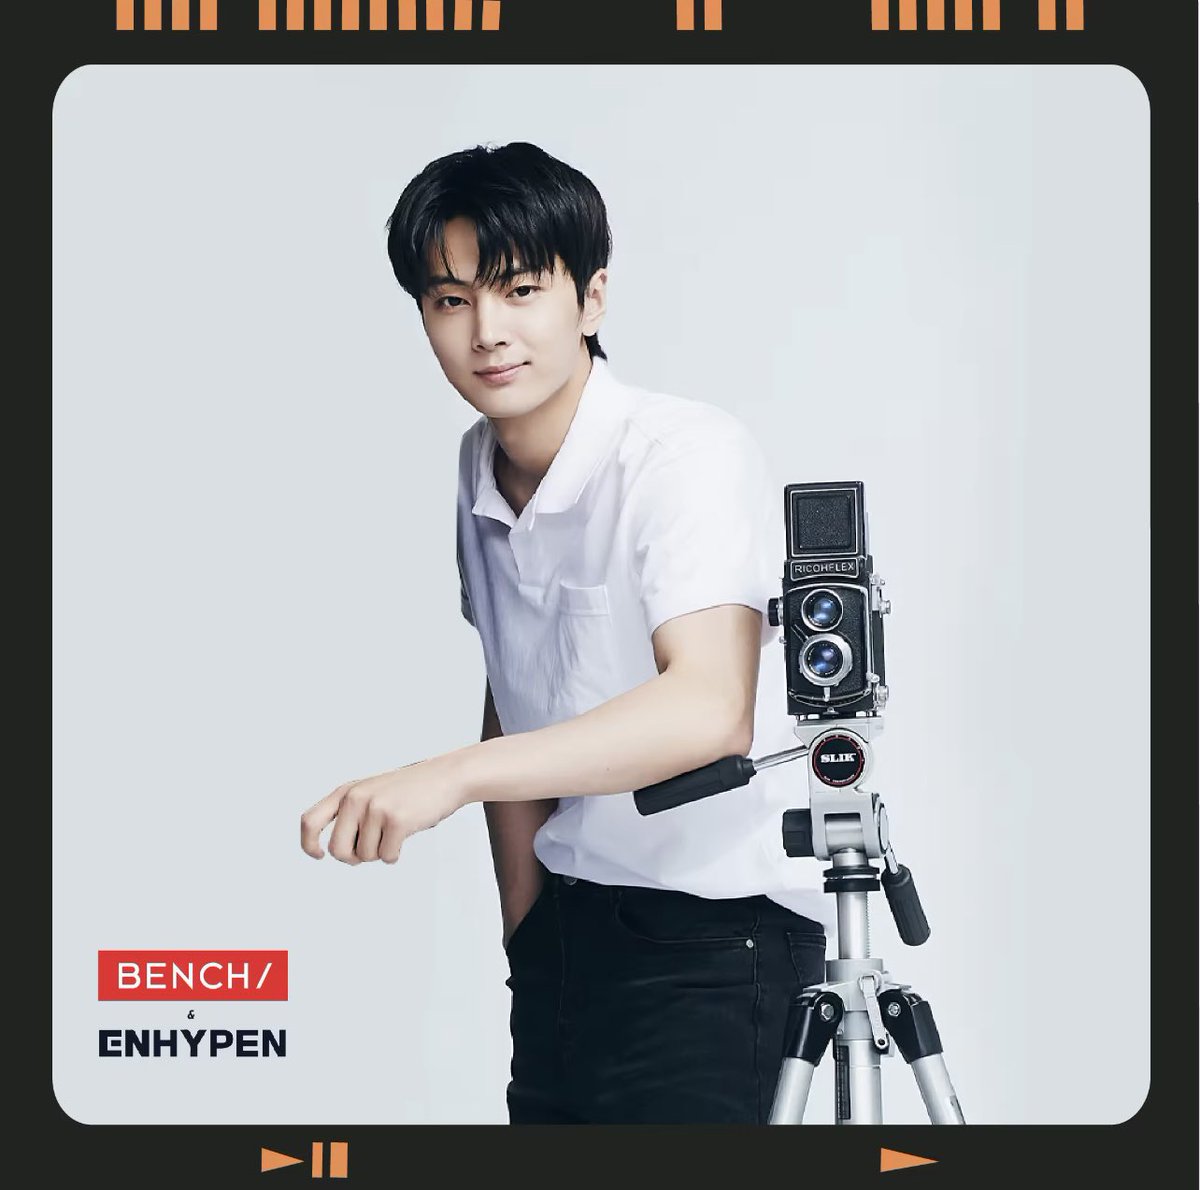 ENGENEs, BENCH’s (@benchtm) latest collection #DENIMbyBENCH with #JAY is now available on both Lazada and Shopee!

🔗: s.lazada.com.ph/s.SPKnK
🔗: s.lazada.com.ph/s.SPKM8
🔗: shp.ee/wjc9vfs